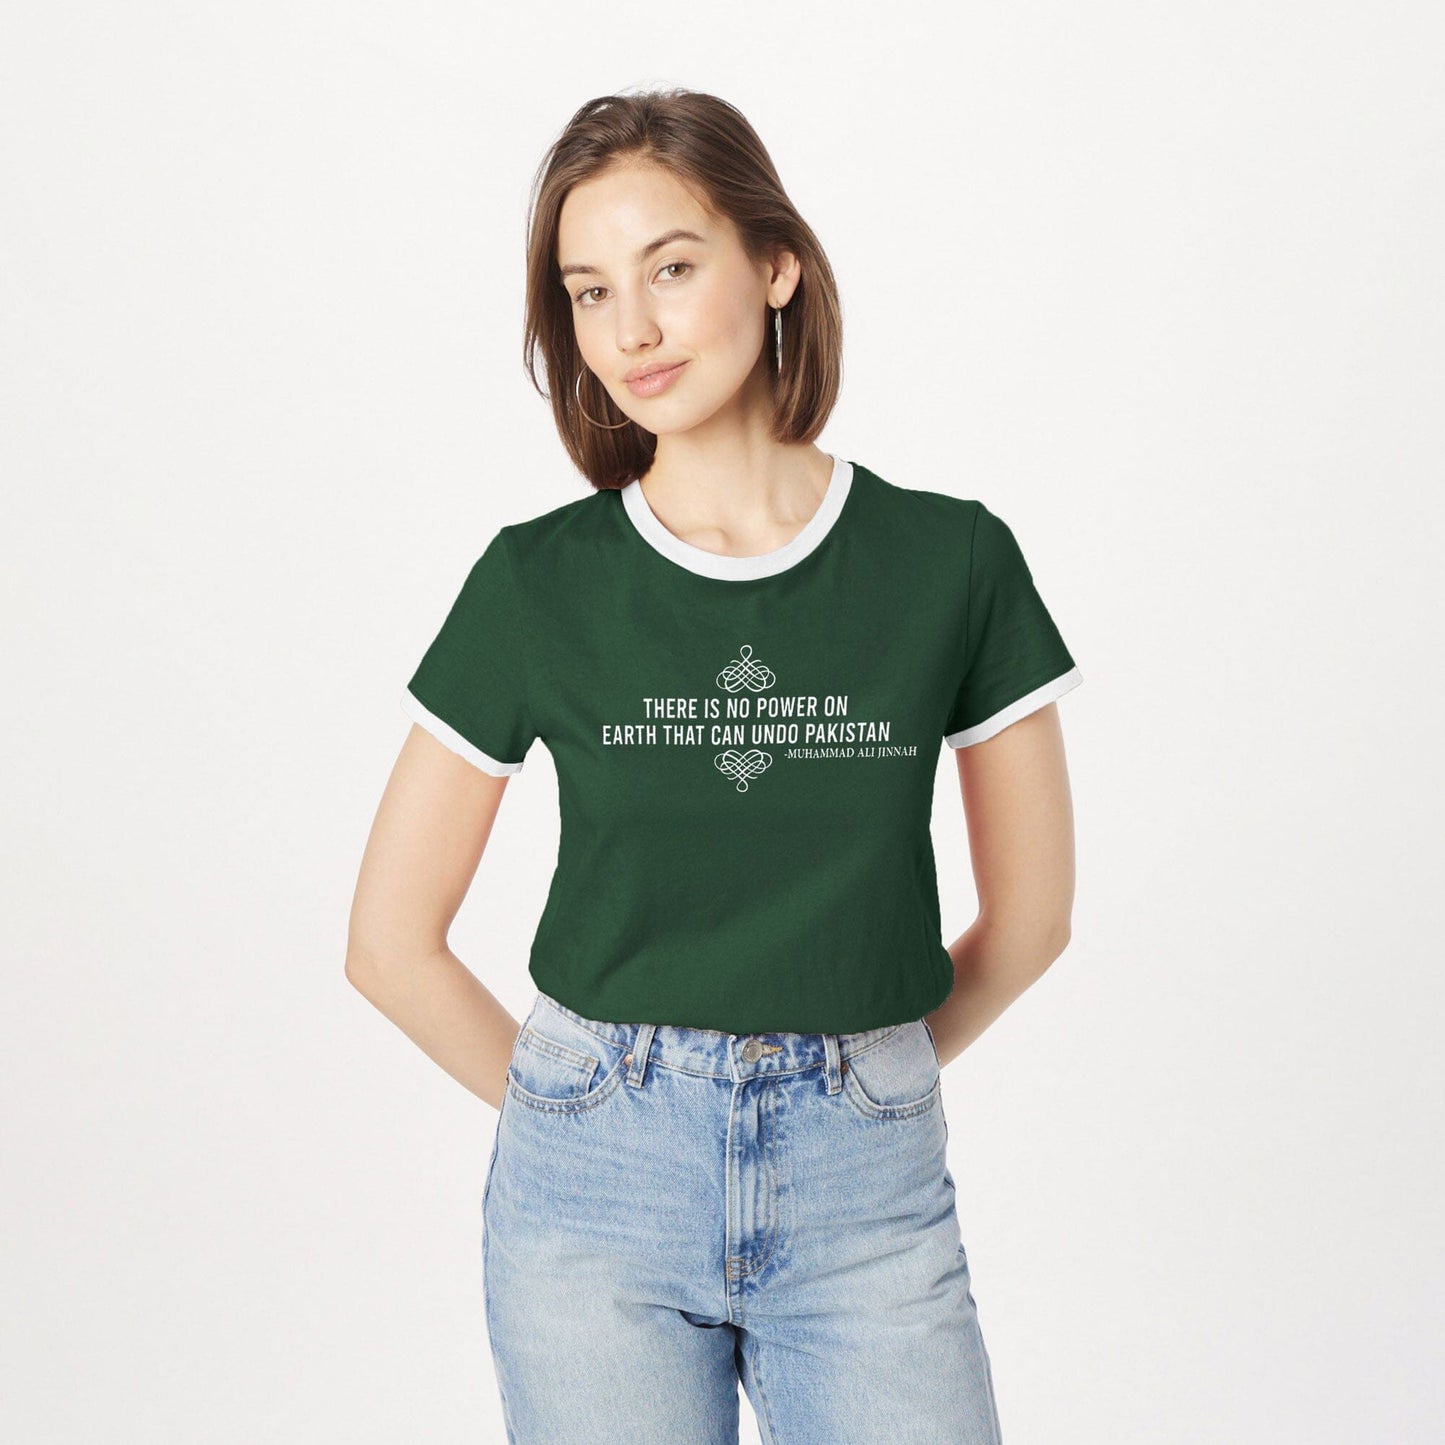 Madamadam Women's There Is No Power On Earth Printed Tee Shirt Women's Tee Shirt MADAMADAM Bottle Green S 